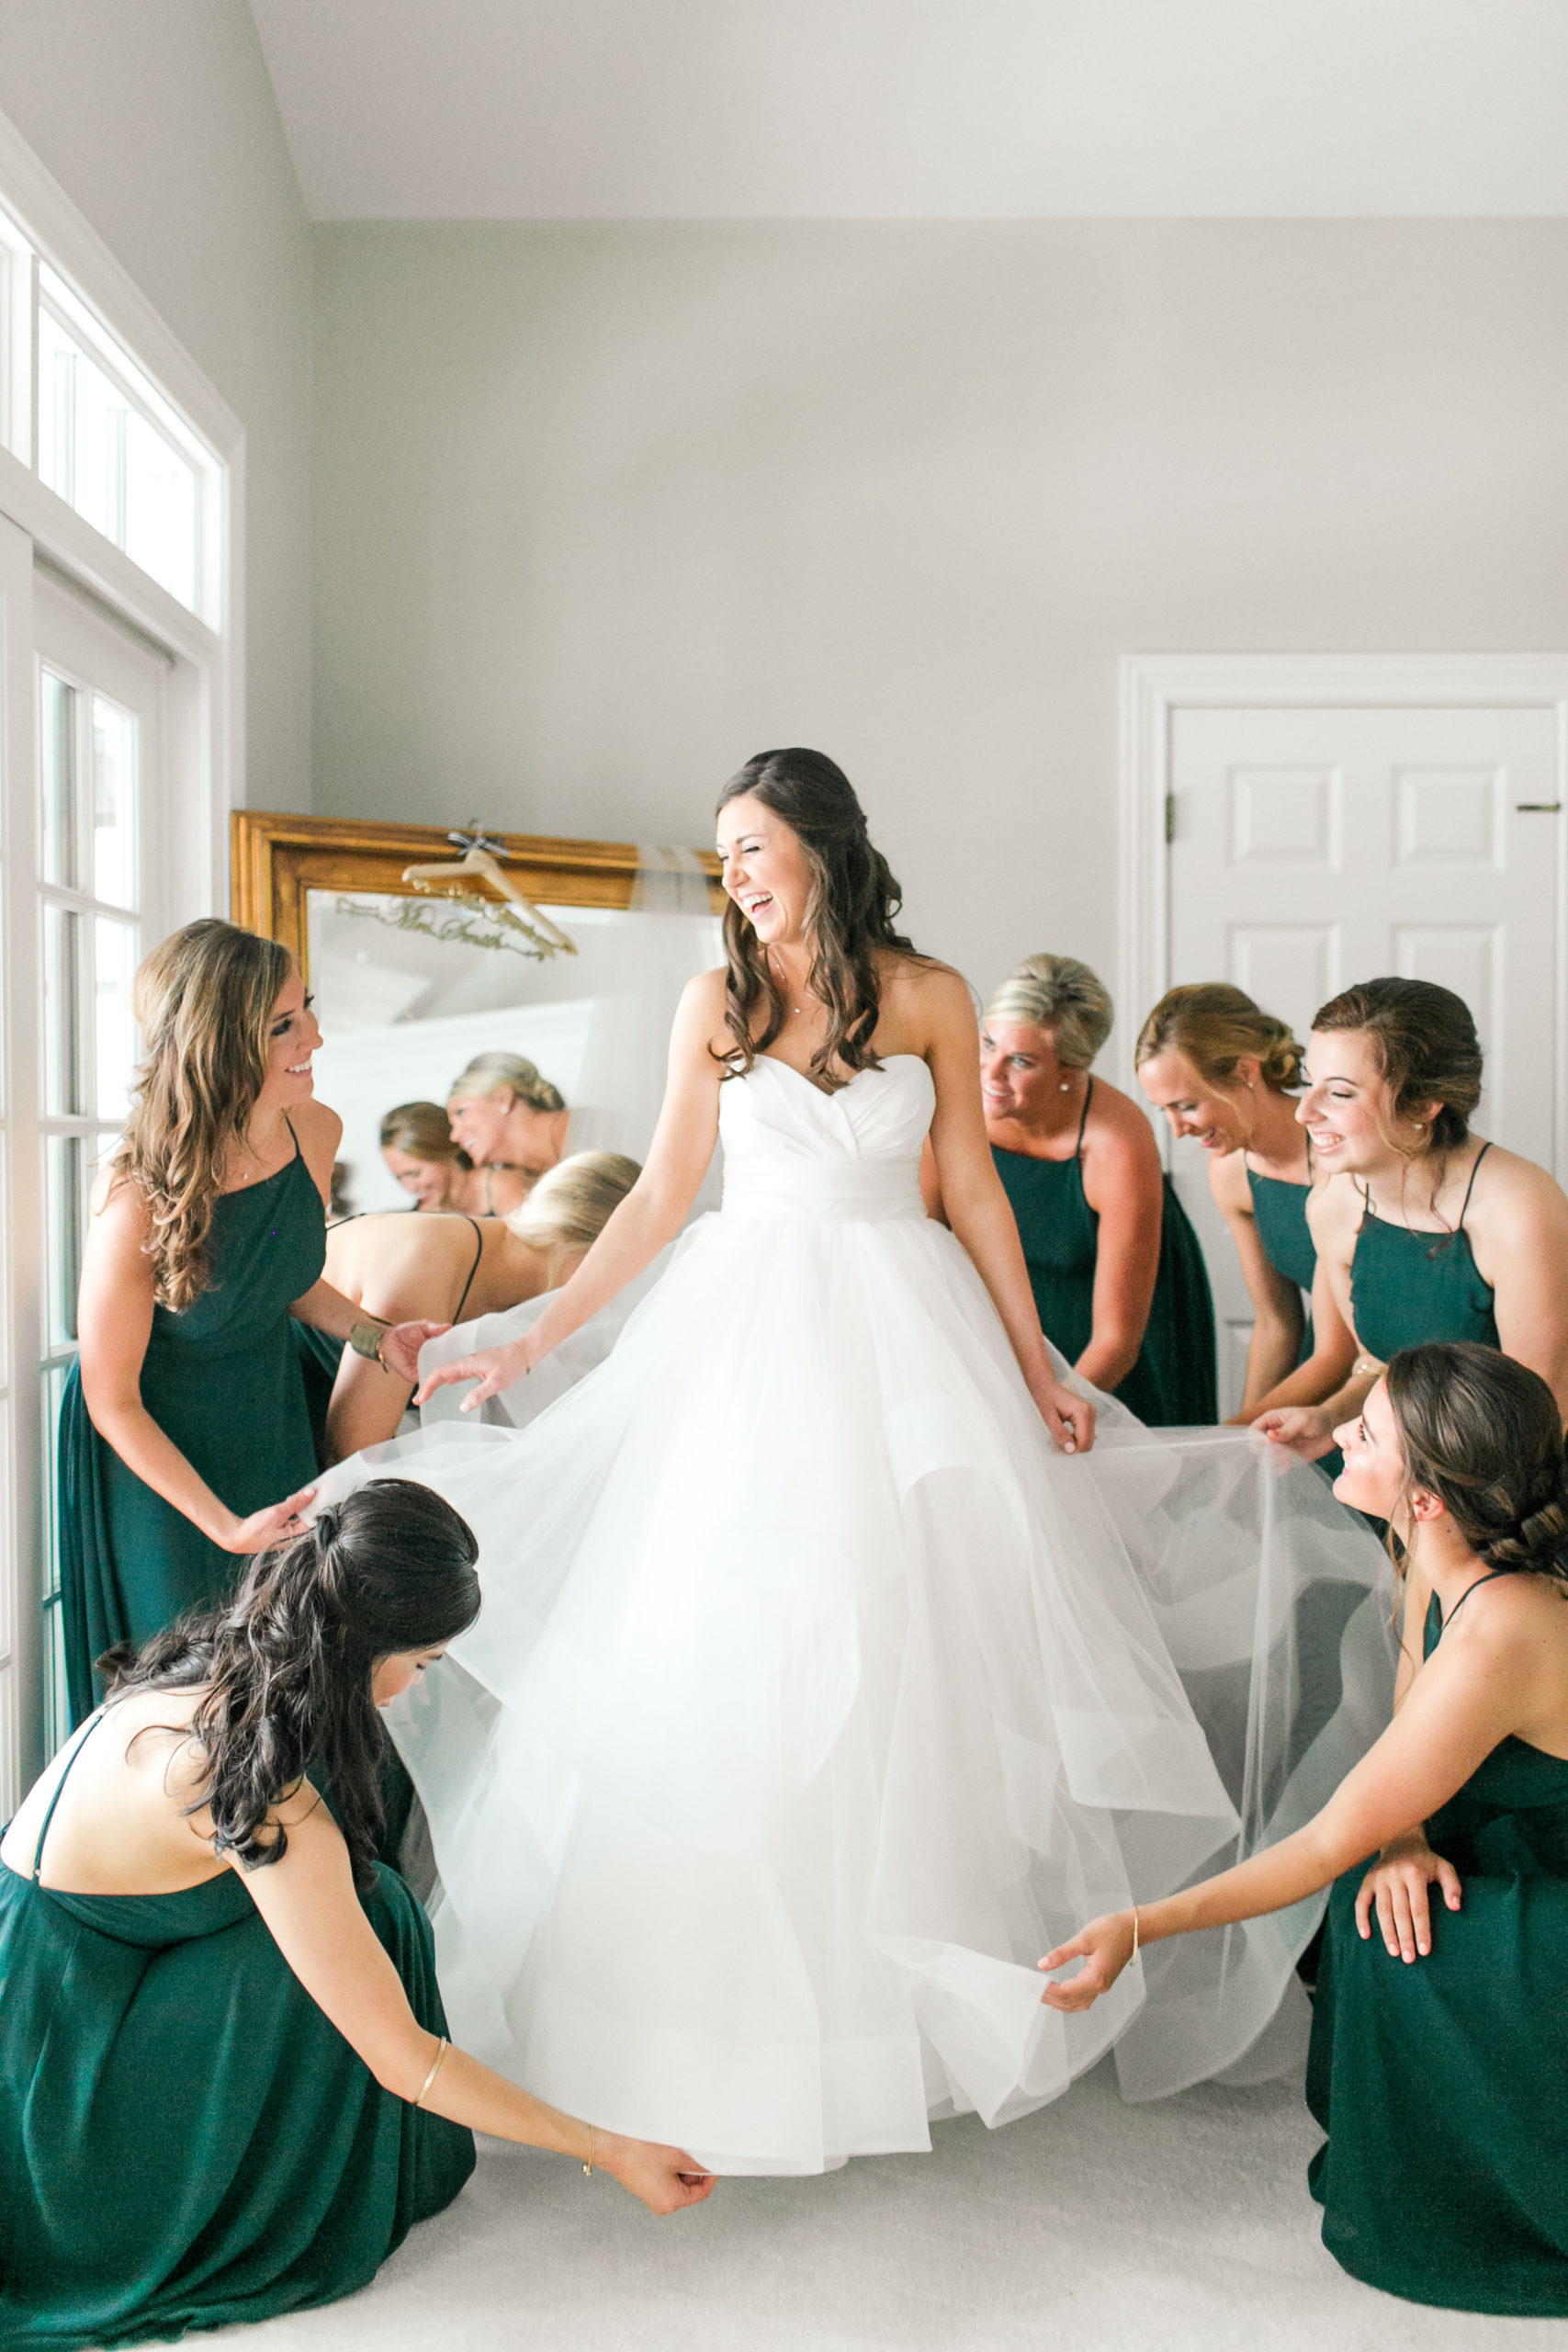 View More: https://kristimckeagphotography.pass.us/abbey-charlie-married